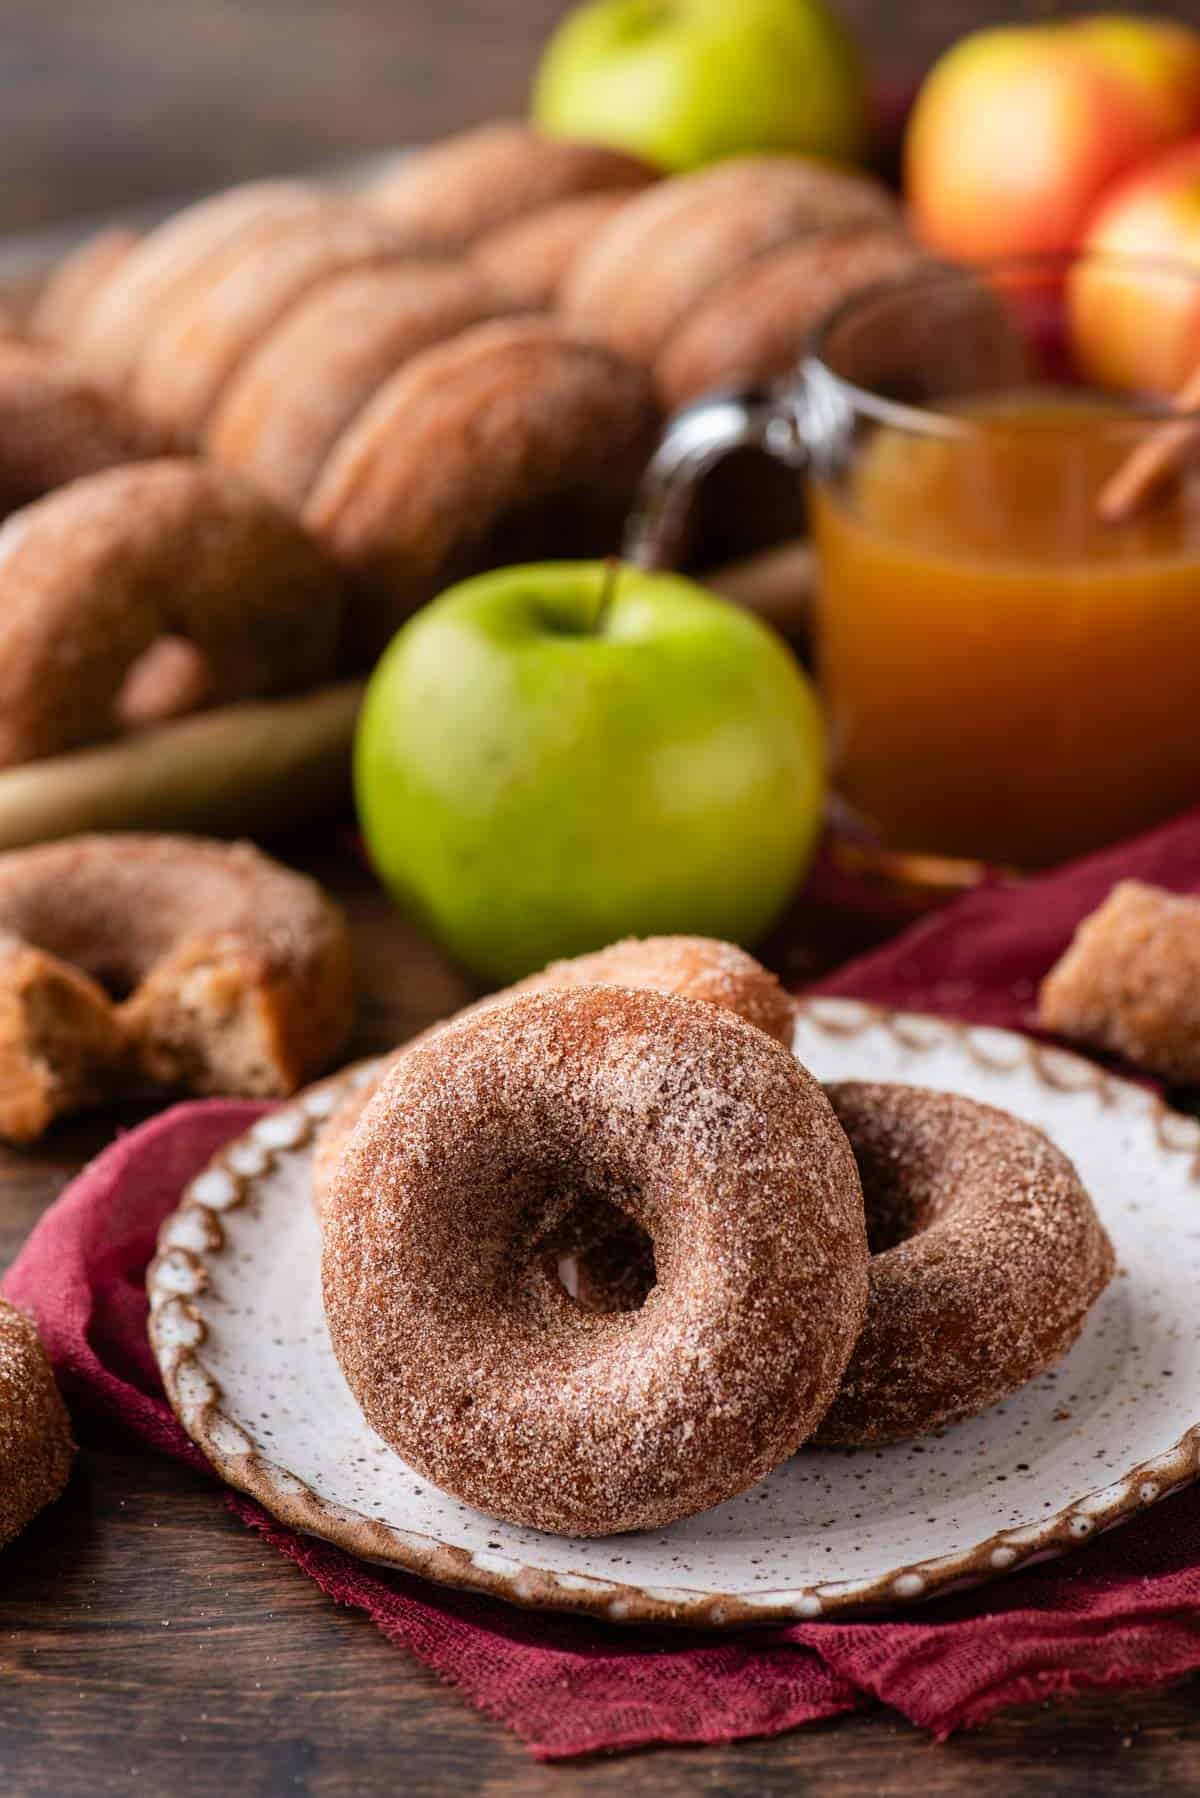 two apple cider donuts on a plate that is sitting on top of a maroon kitchen towel, surrounded by a whole green apple, a cup of apple cider, and more donuts